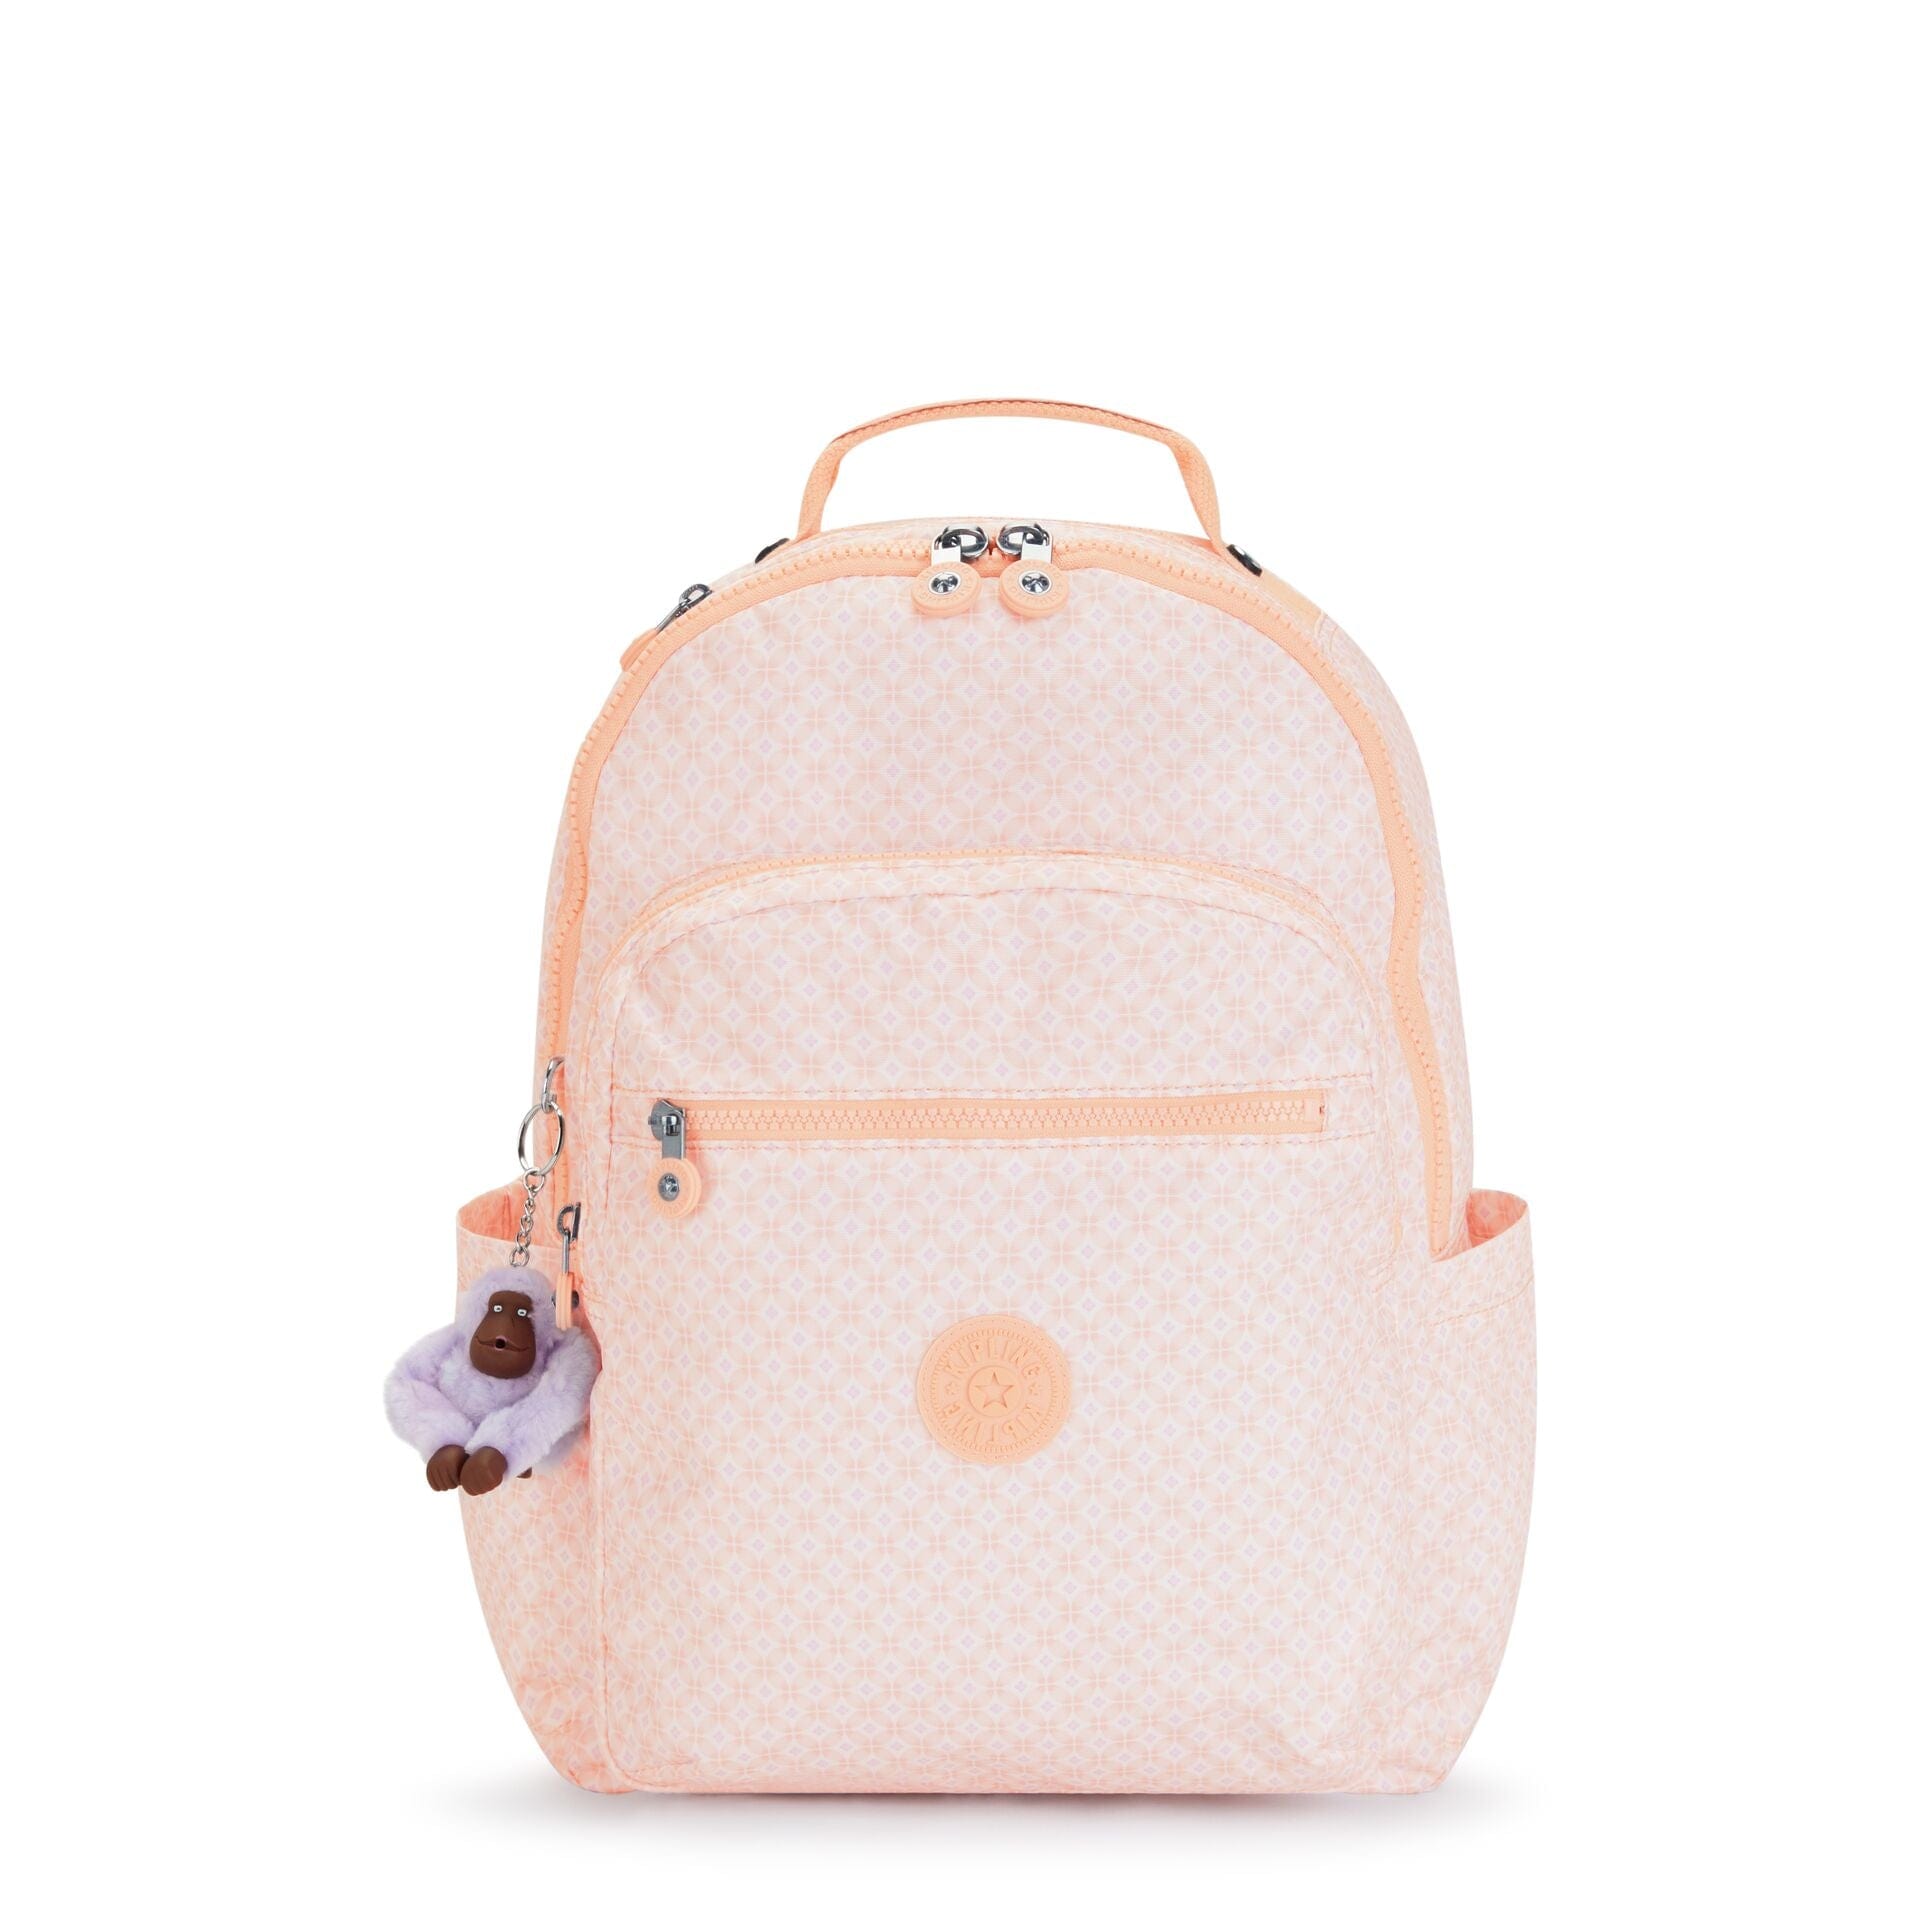 KIPLING-Seoul-Large Backpack with Padded Laptop Compartment-Girly Tile Prt-I4851-5EH